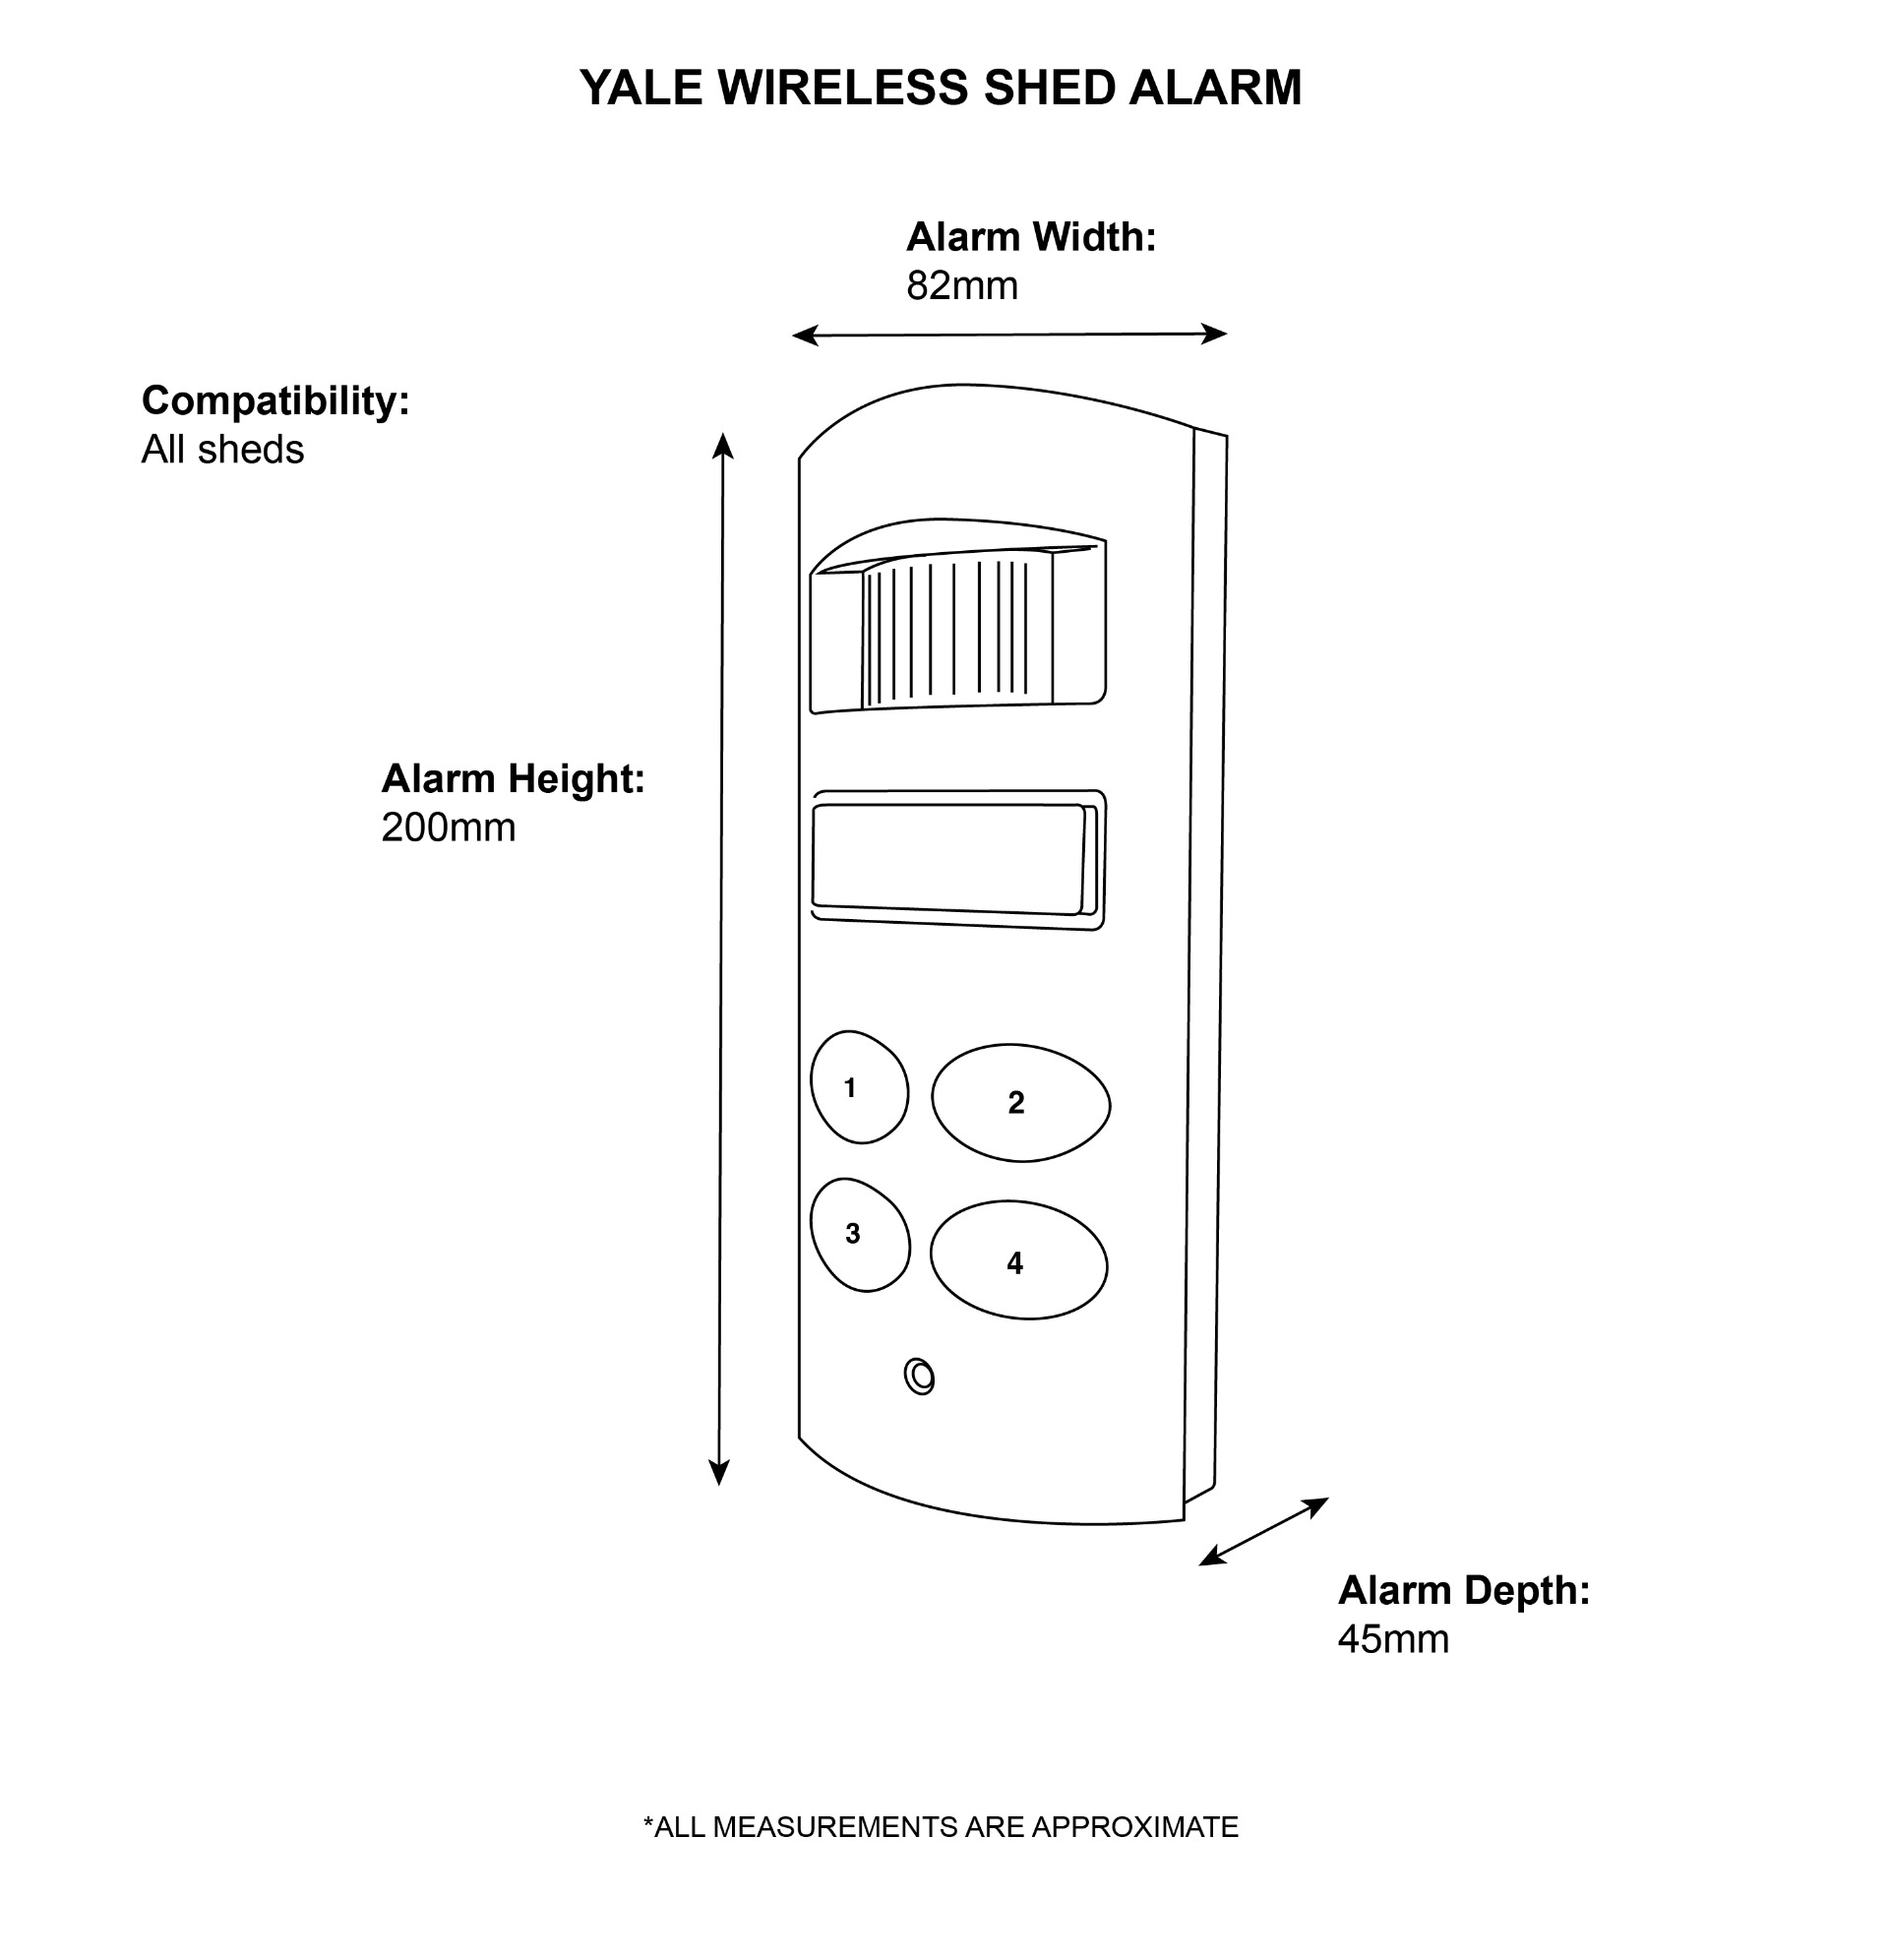 Yale Wireless Shed Alarm Dimensions